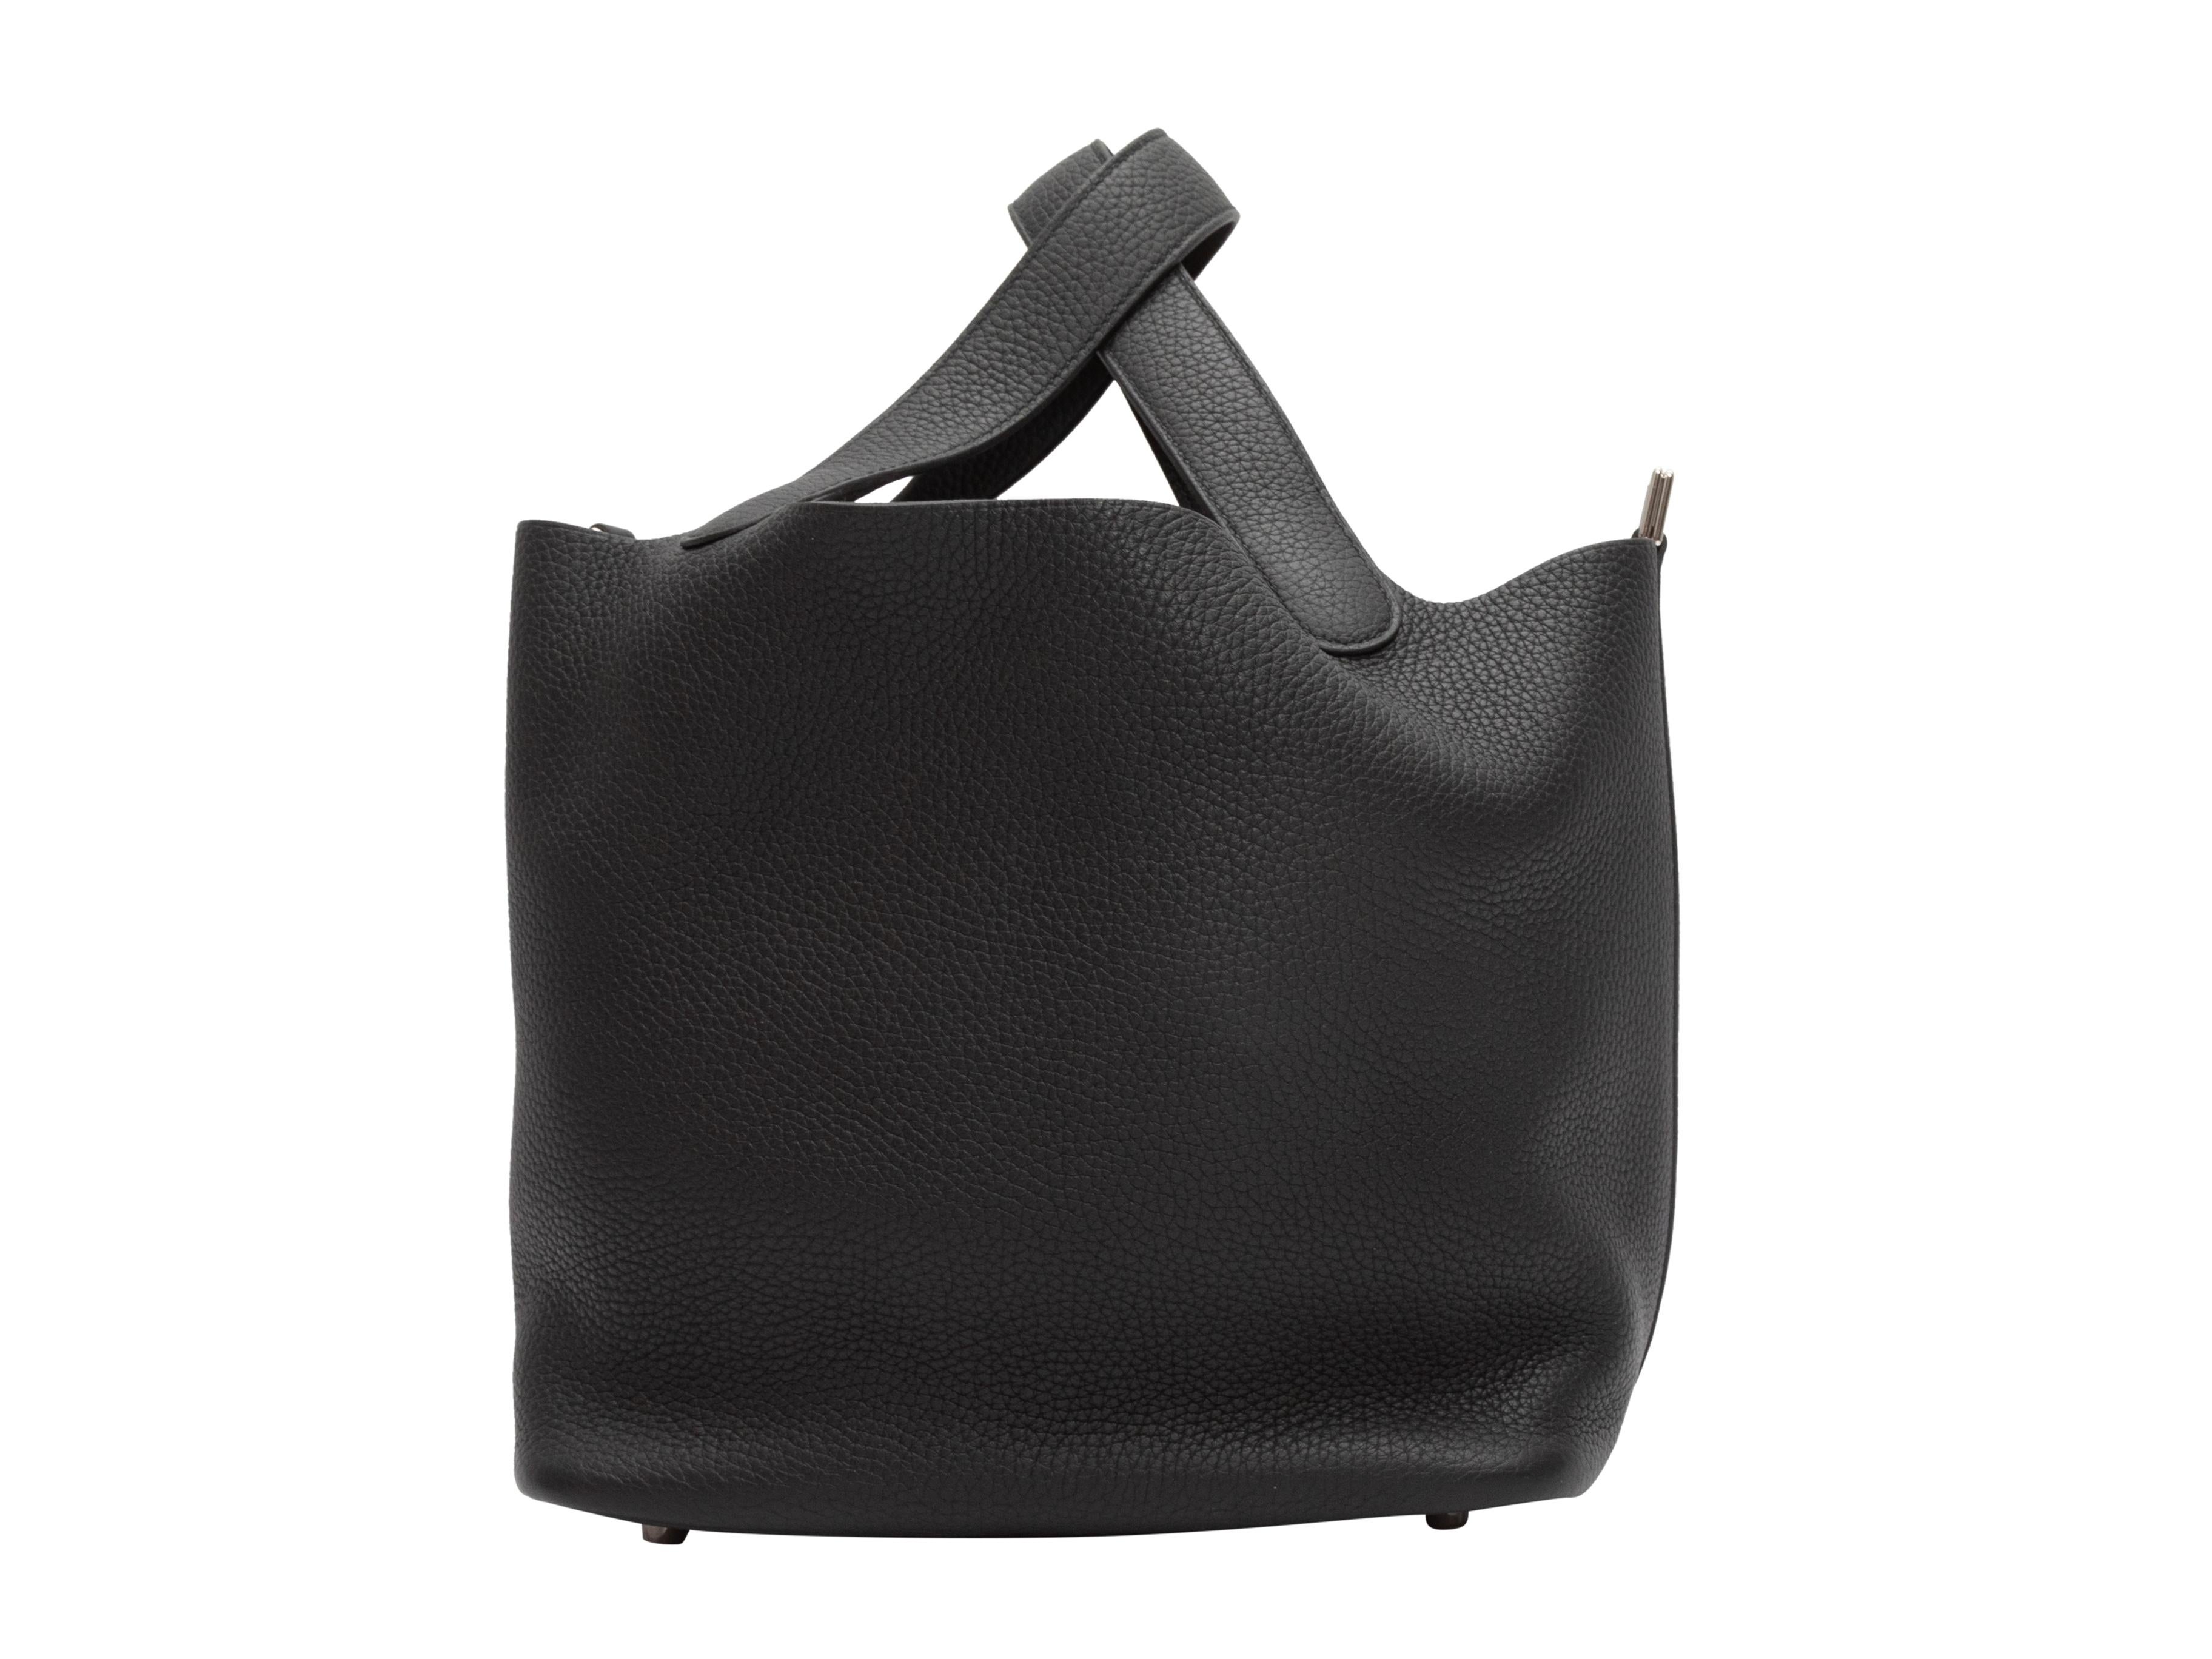 Product Details: Black Hermes Picotin Togo Leather Tote. The Picotin Togo tote features a leather body, silver-tone hardware, and dual flat top handles. 13